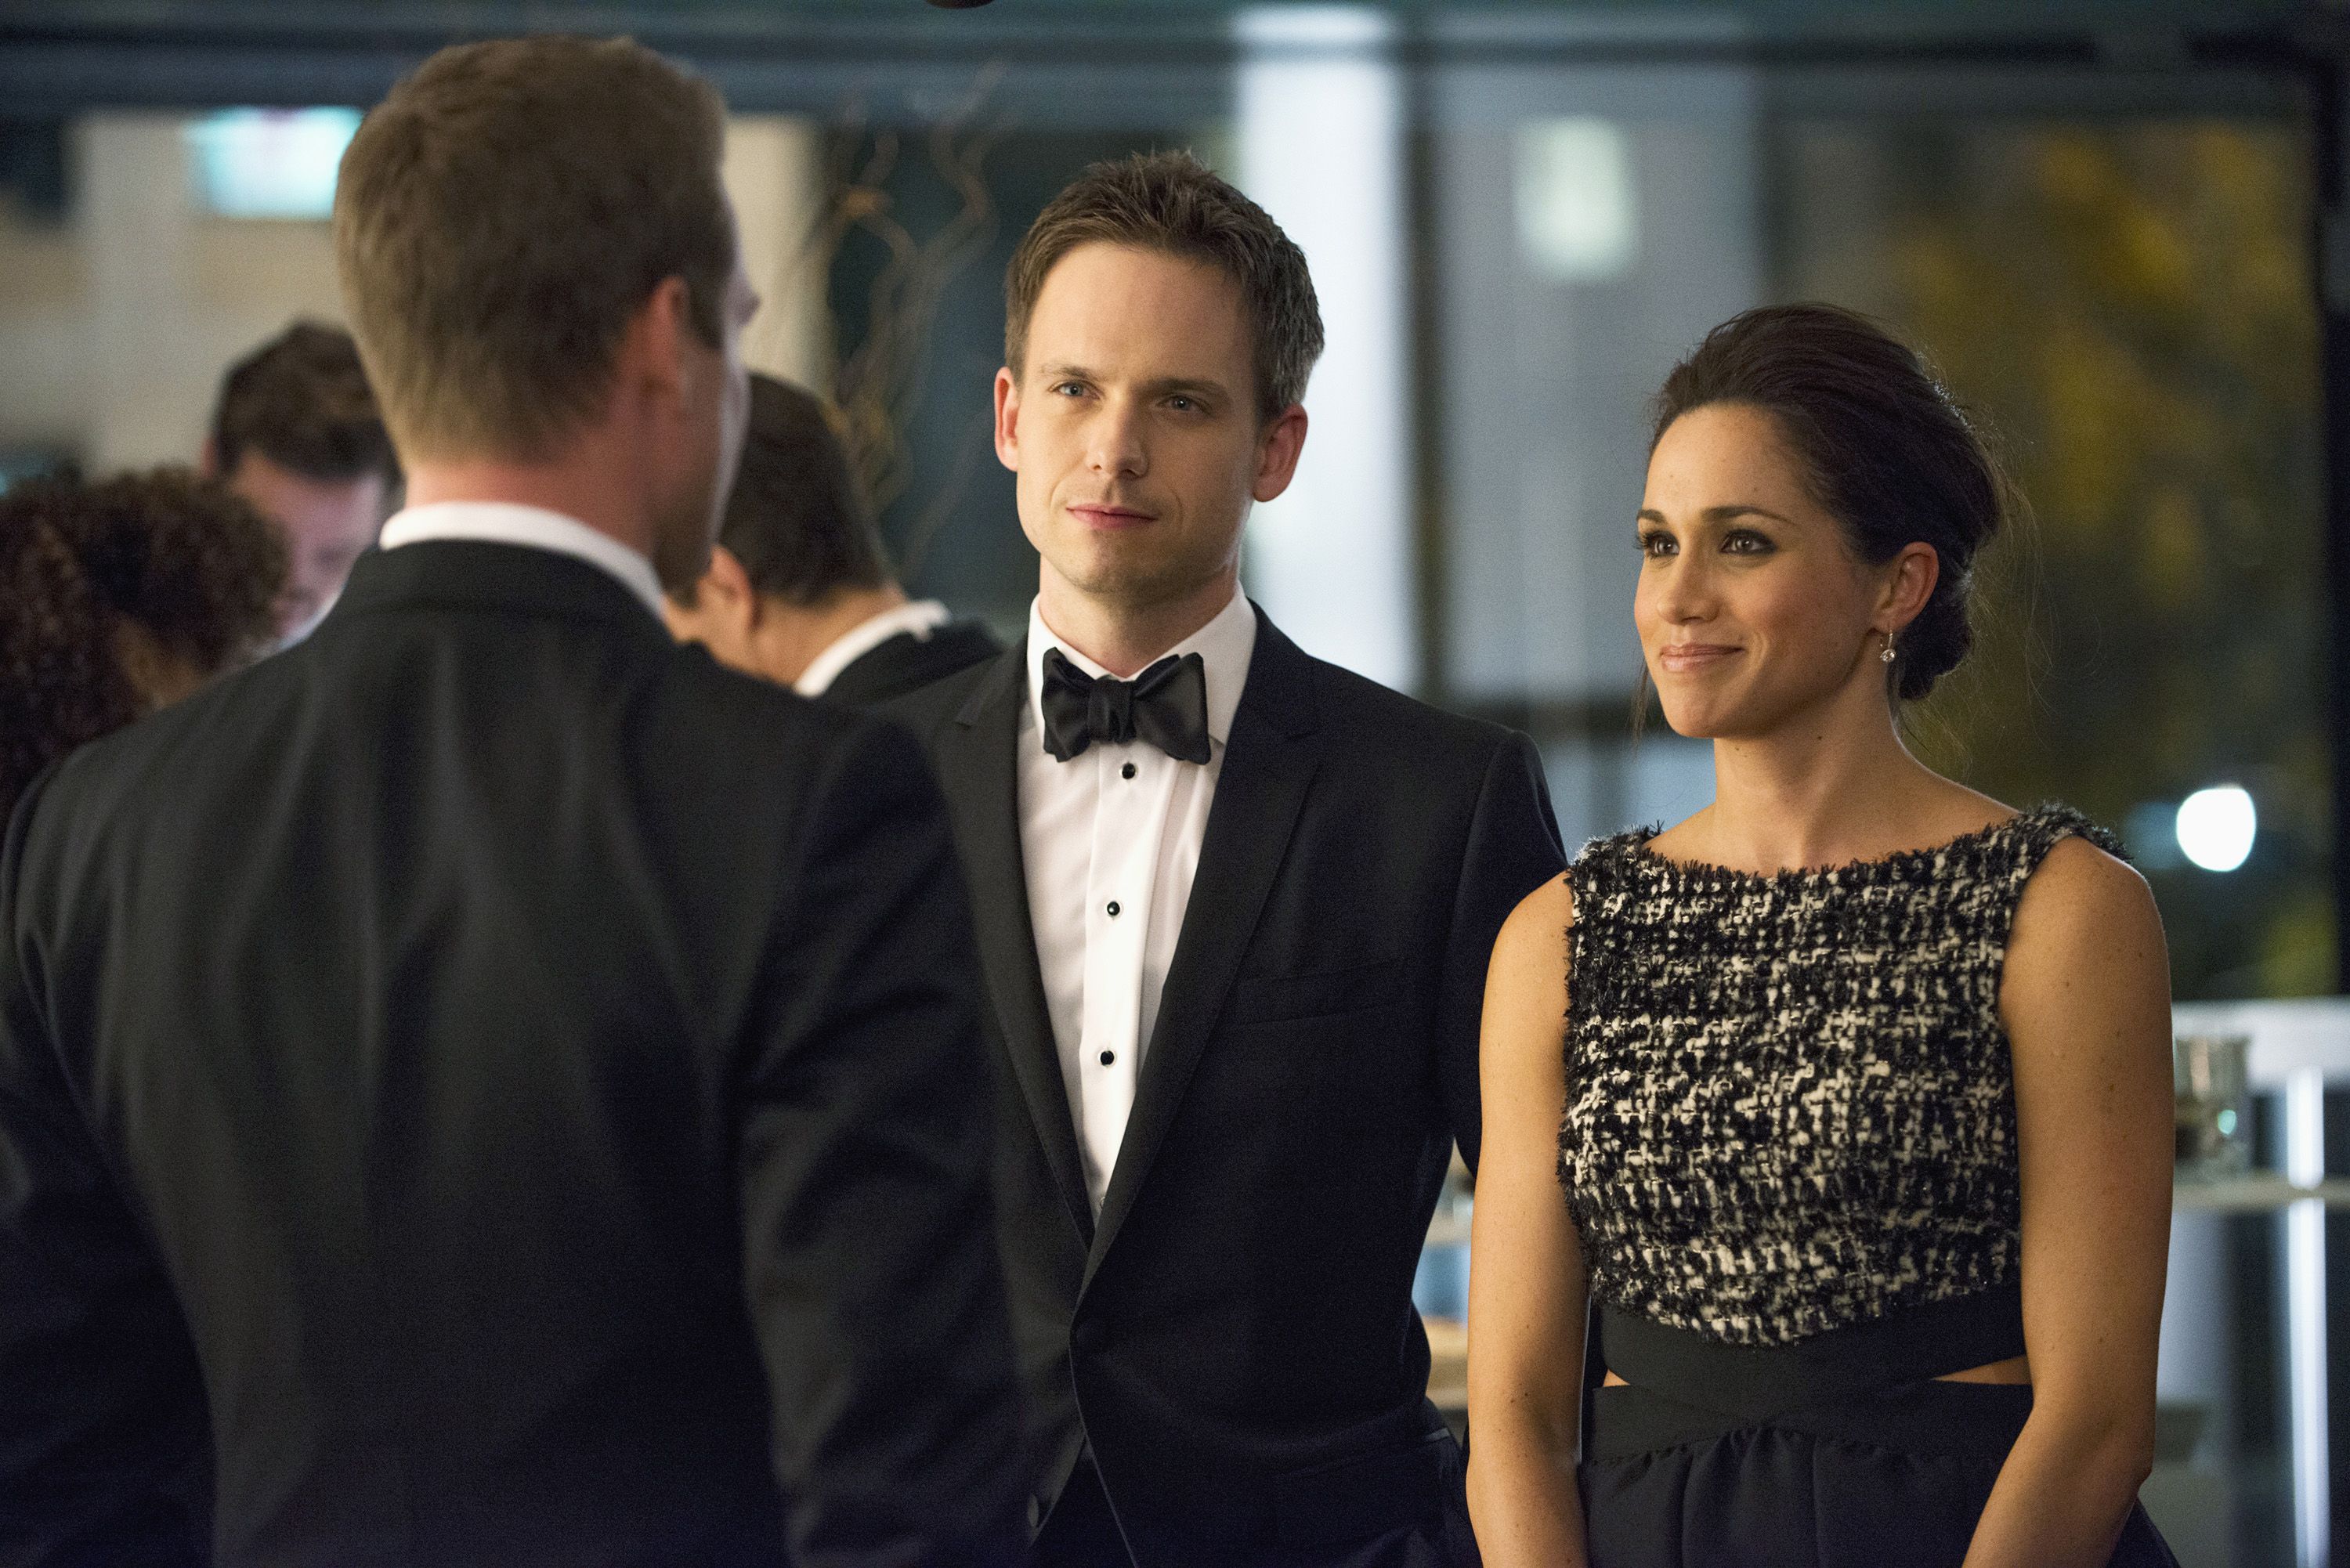 With Meghan Markle and Patrick J. Adams Gone, 'Suits' Retailors